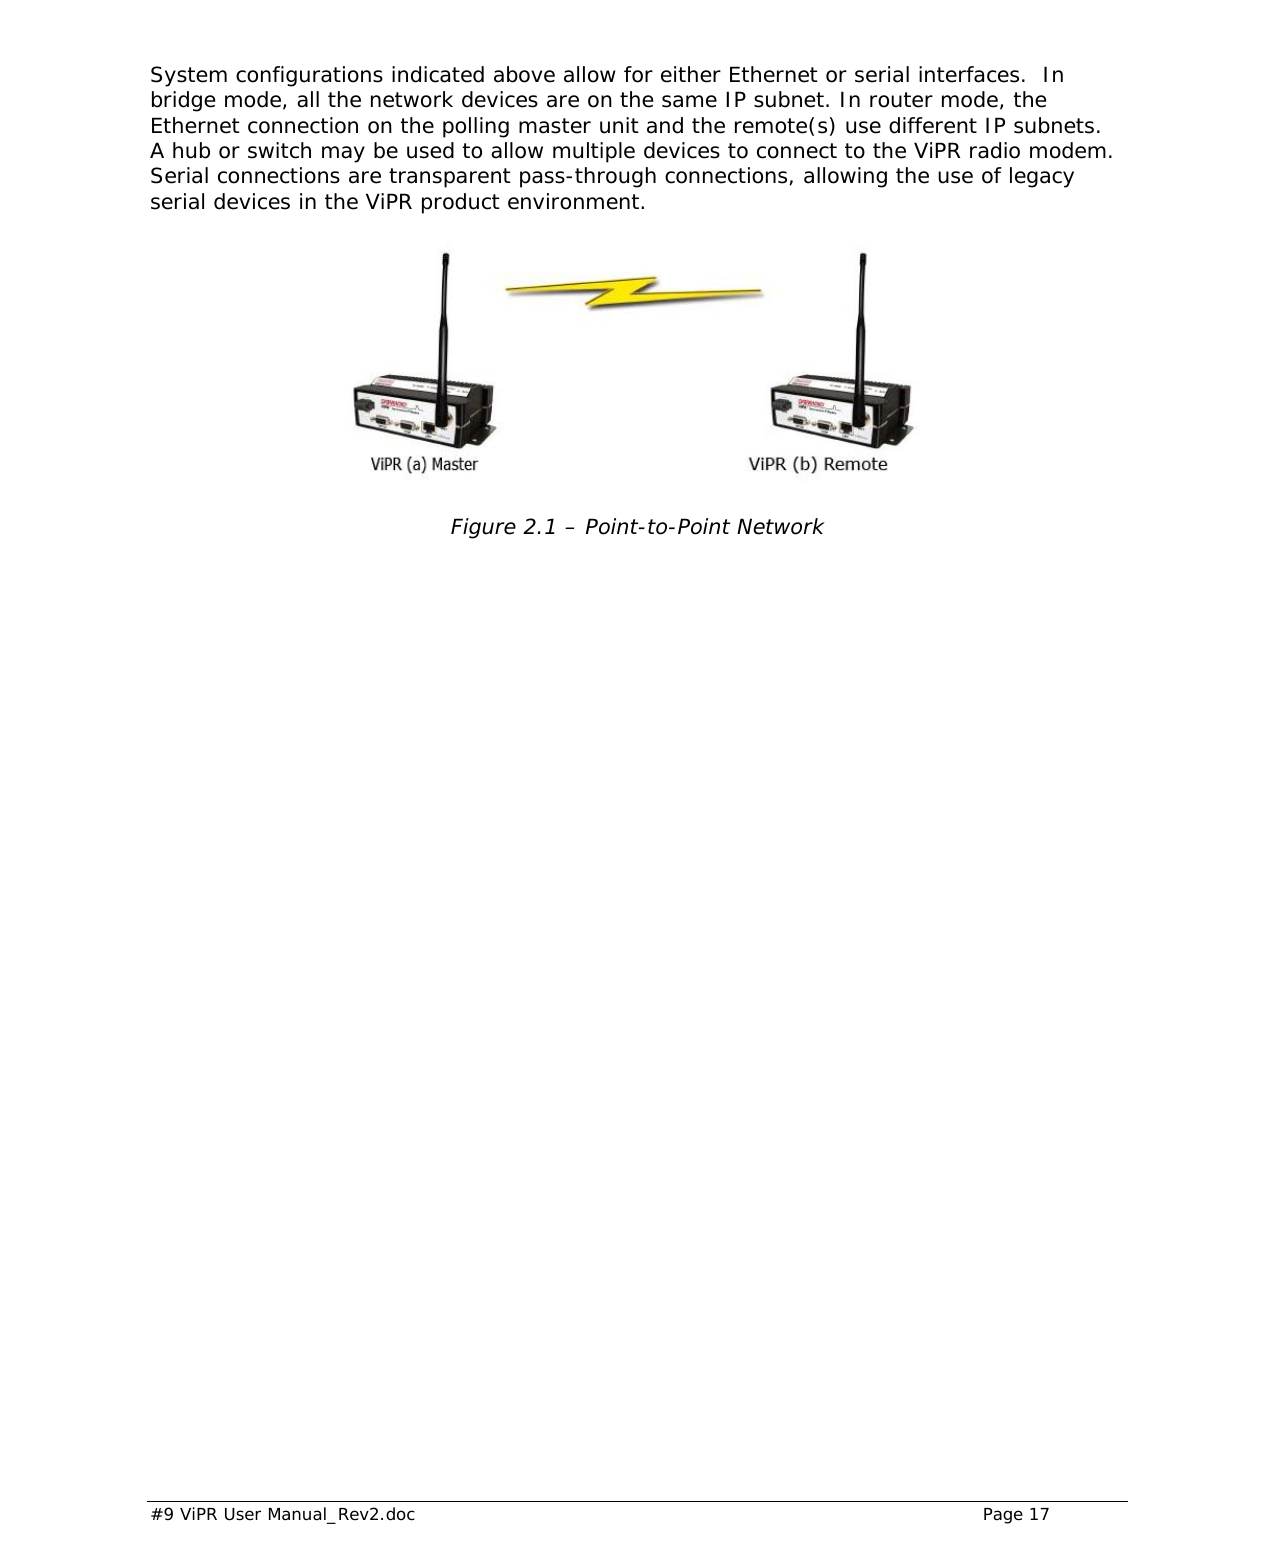  #9 ViPR User Manual_Rev2.doc    Page 17 System configurations indicated above allow for either Ethernet or serial interfaces.  In bridge mode, all the network devices are on the same IP subnet. In router mode, the Ethernet connection on the polling master unit and the remote(s) use different IP subnets.  A hub or switch may be used to allow multiple devices to connect to the ViPR radio modem.  Serial connections are transparent pass-through connections, allowing the use of legacy serial devices in the ViPR product environment.    Figure 2.1 – Point-to-Point Network  